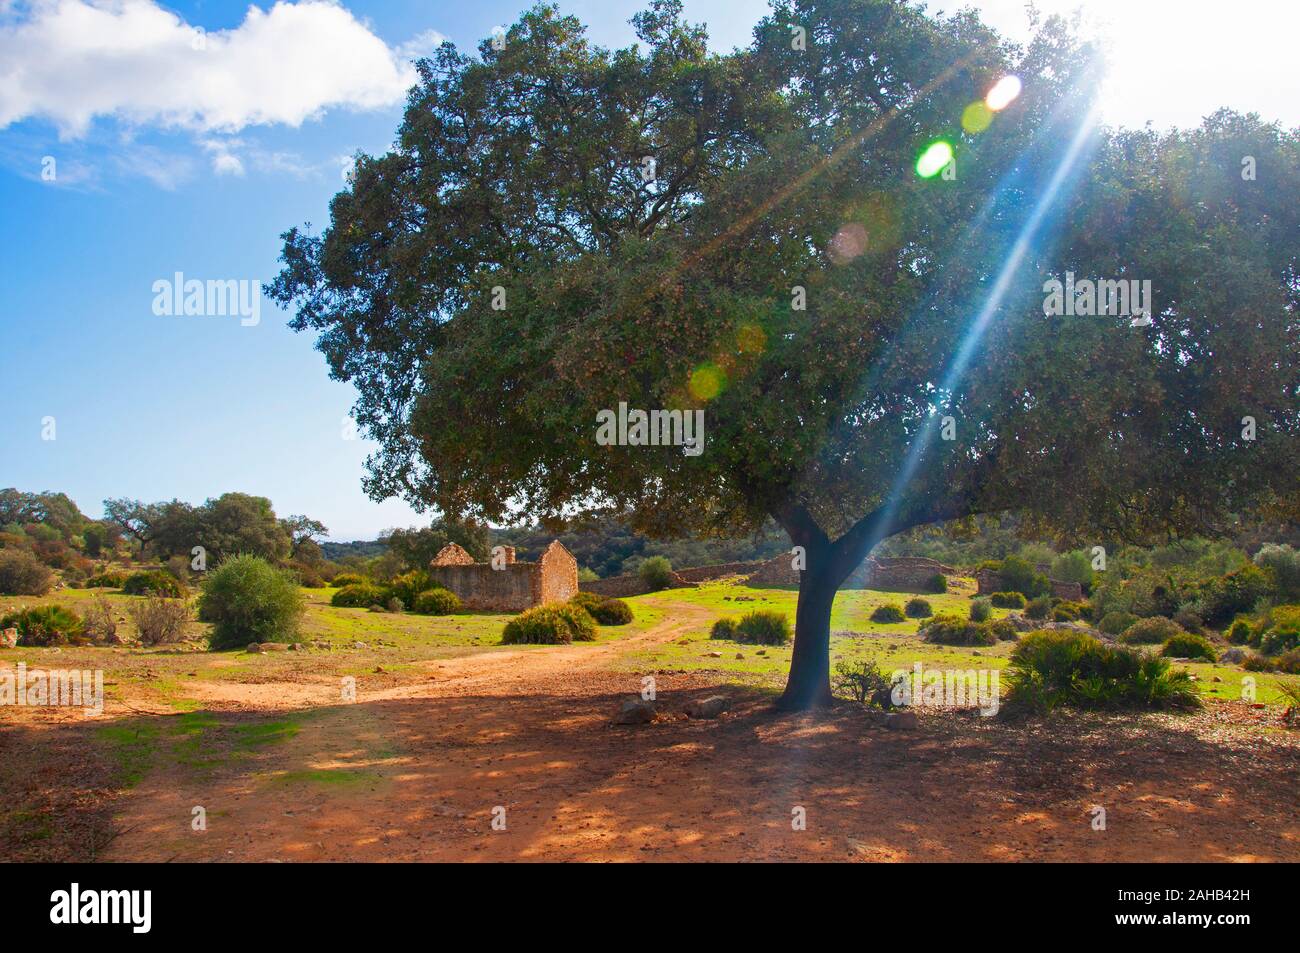 Brown dirt field, big olive tree, stone ruined house. Blue sky with white clouds. Seville, Spain Stock Photo